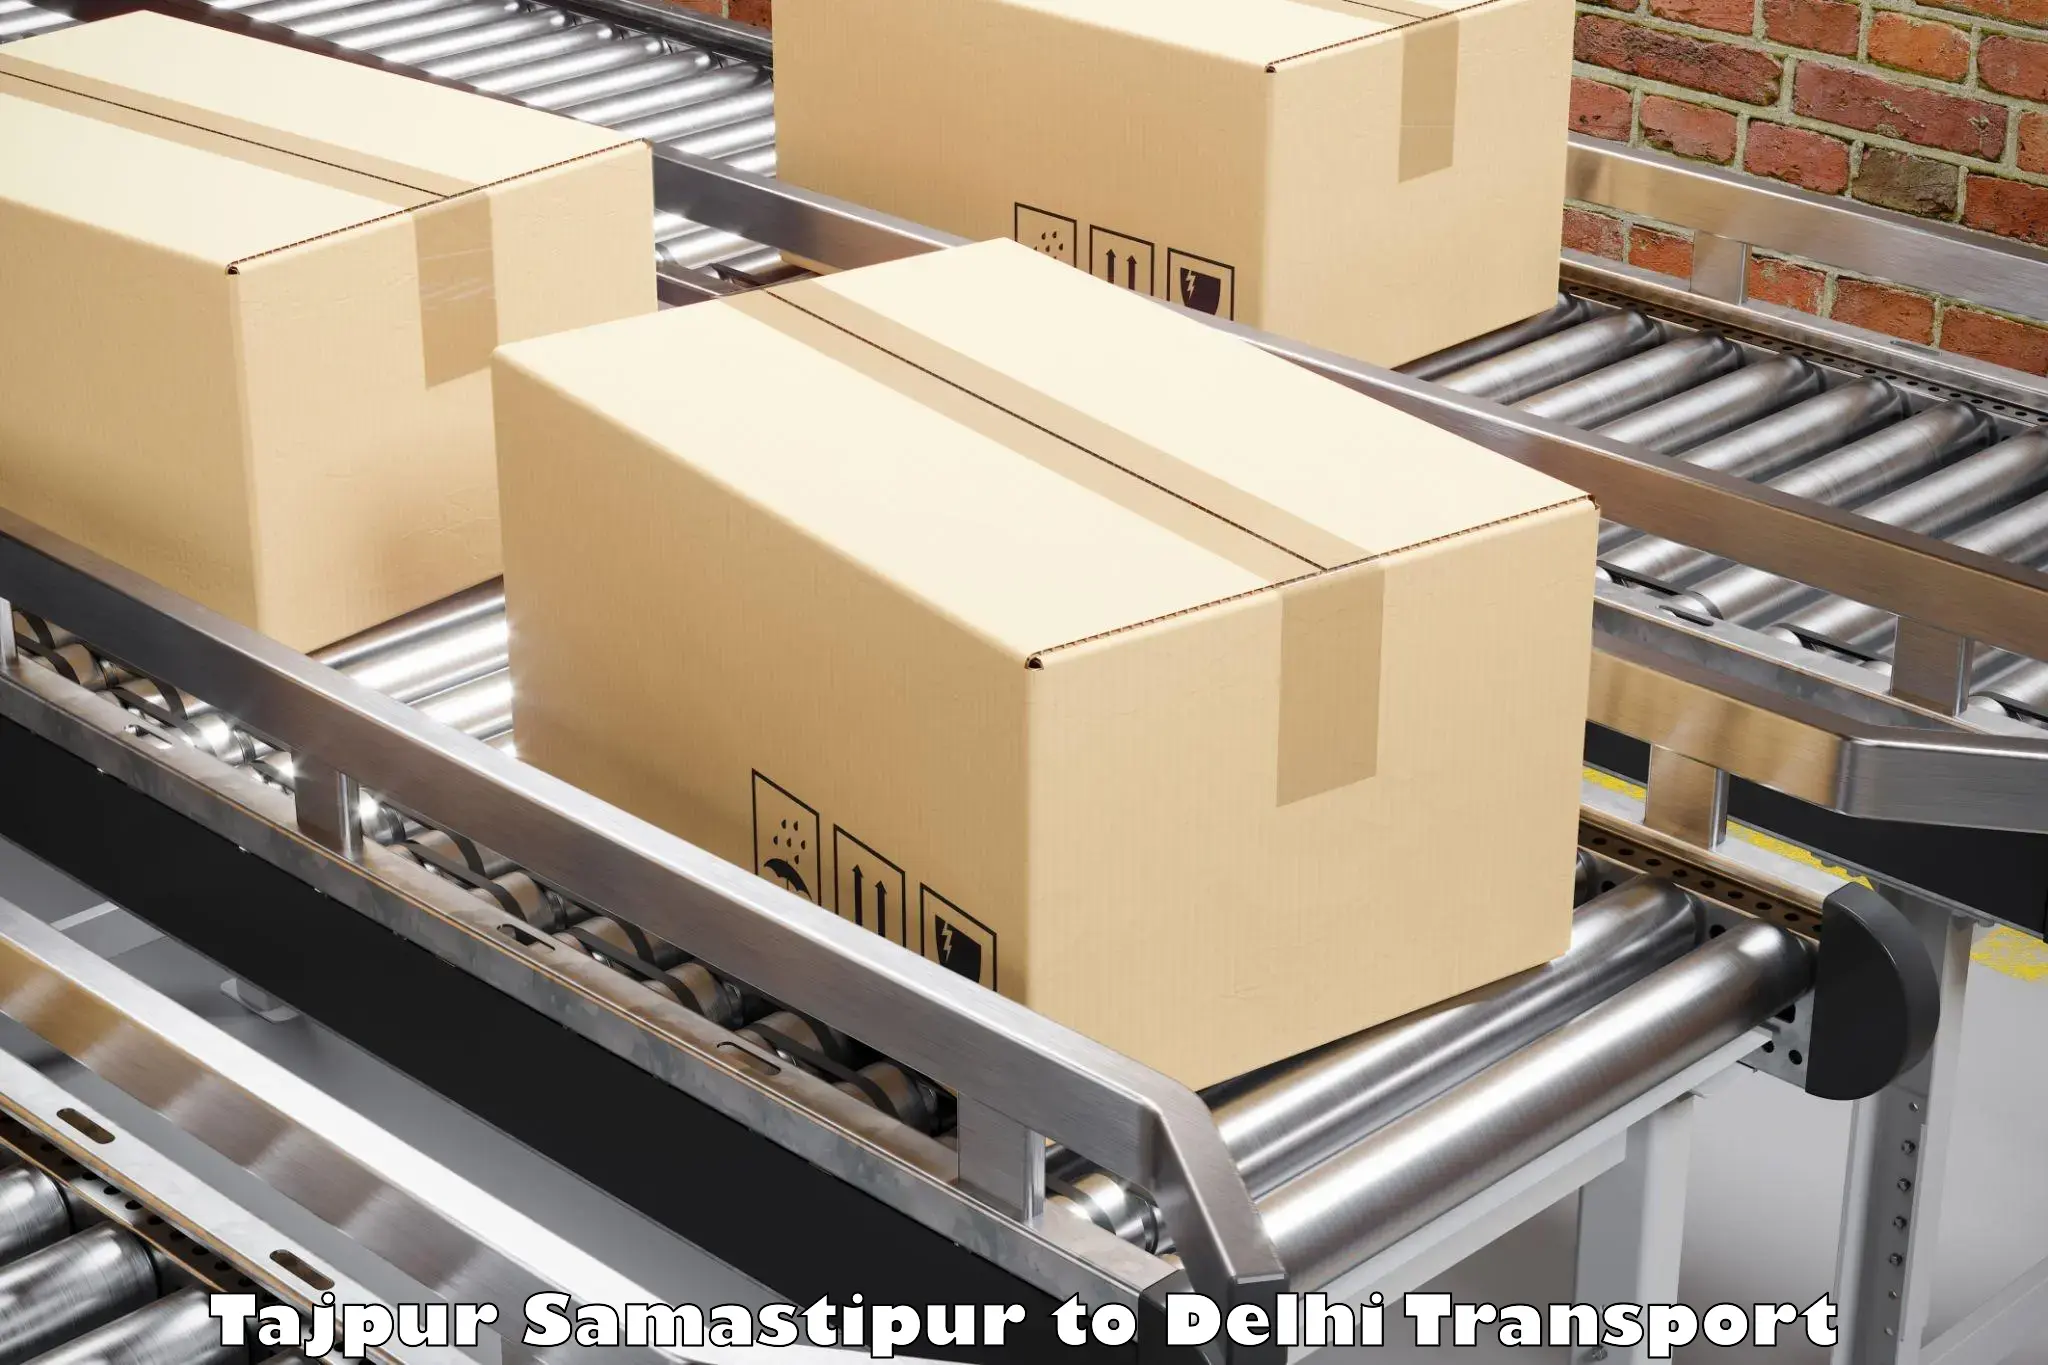 Commercial transport service Tajpur Samastipur to Lodhi Road